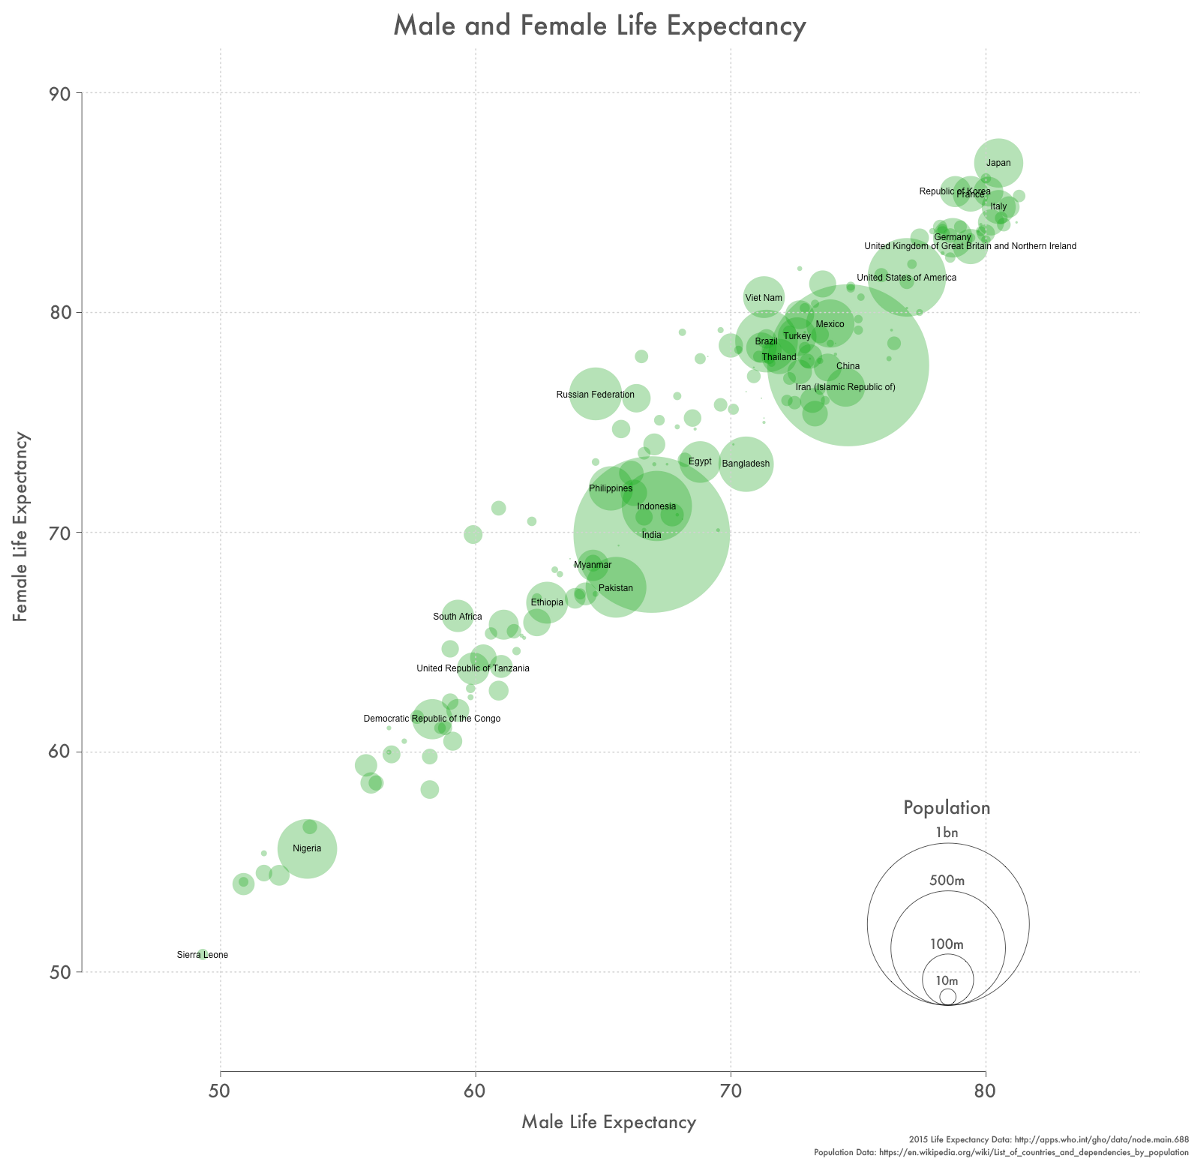 A chart of female life expectancy against male life expectancy, with the size of each bubble indicating the country's population. There is a fairly consistent correlation, with only a handful of exceptions like eg Russia where one sex lives noticeably longer lives than the other.